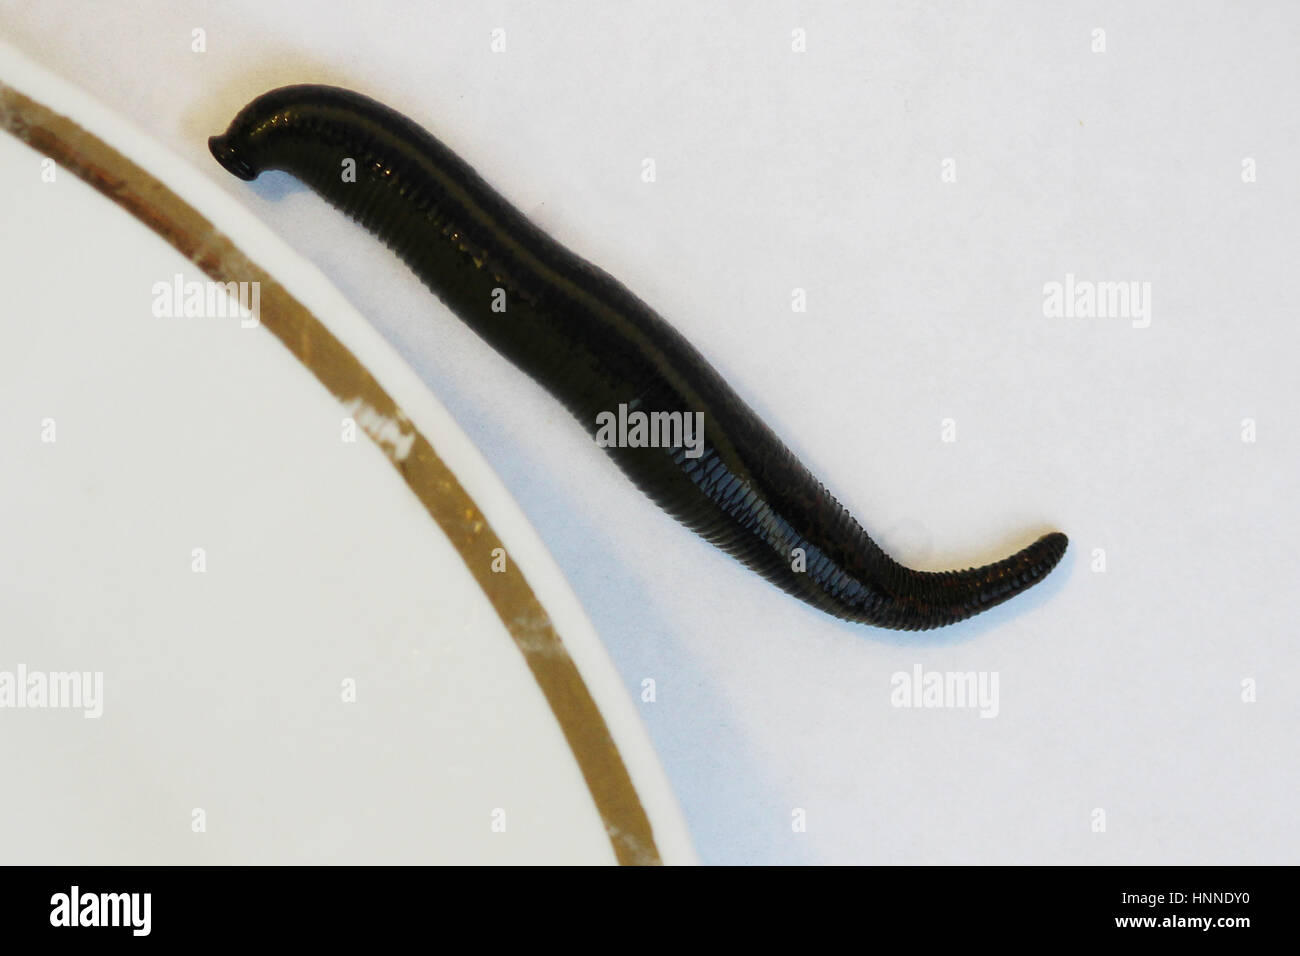 two medical leeches Hirudo medicinalis on a white plate Stock Photo - Alamy